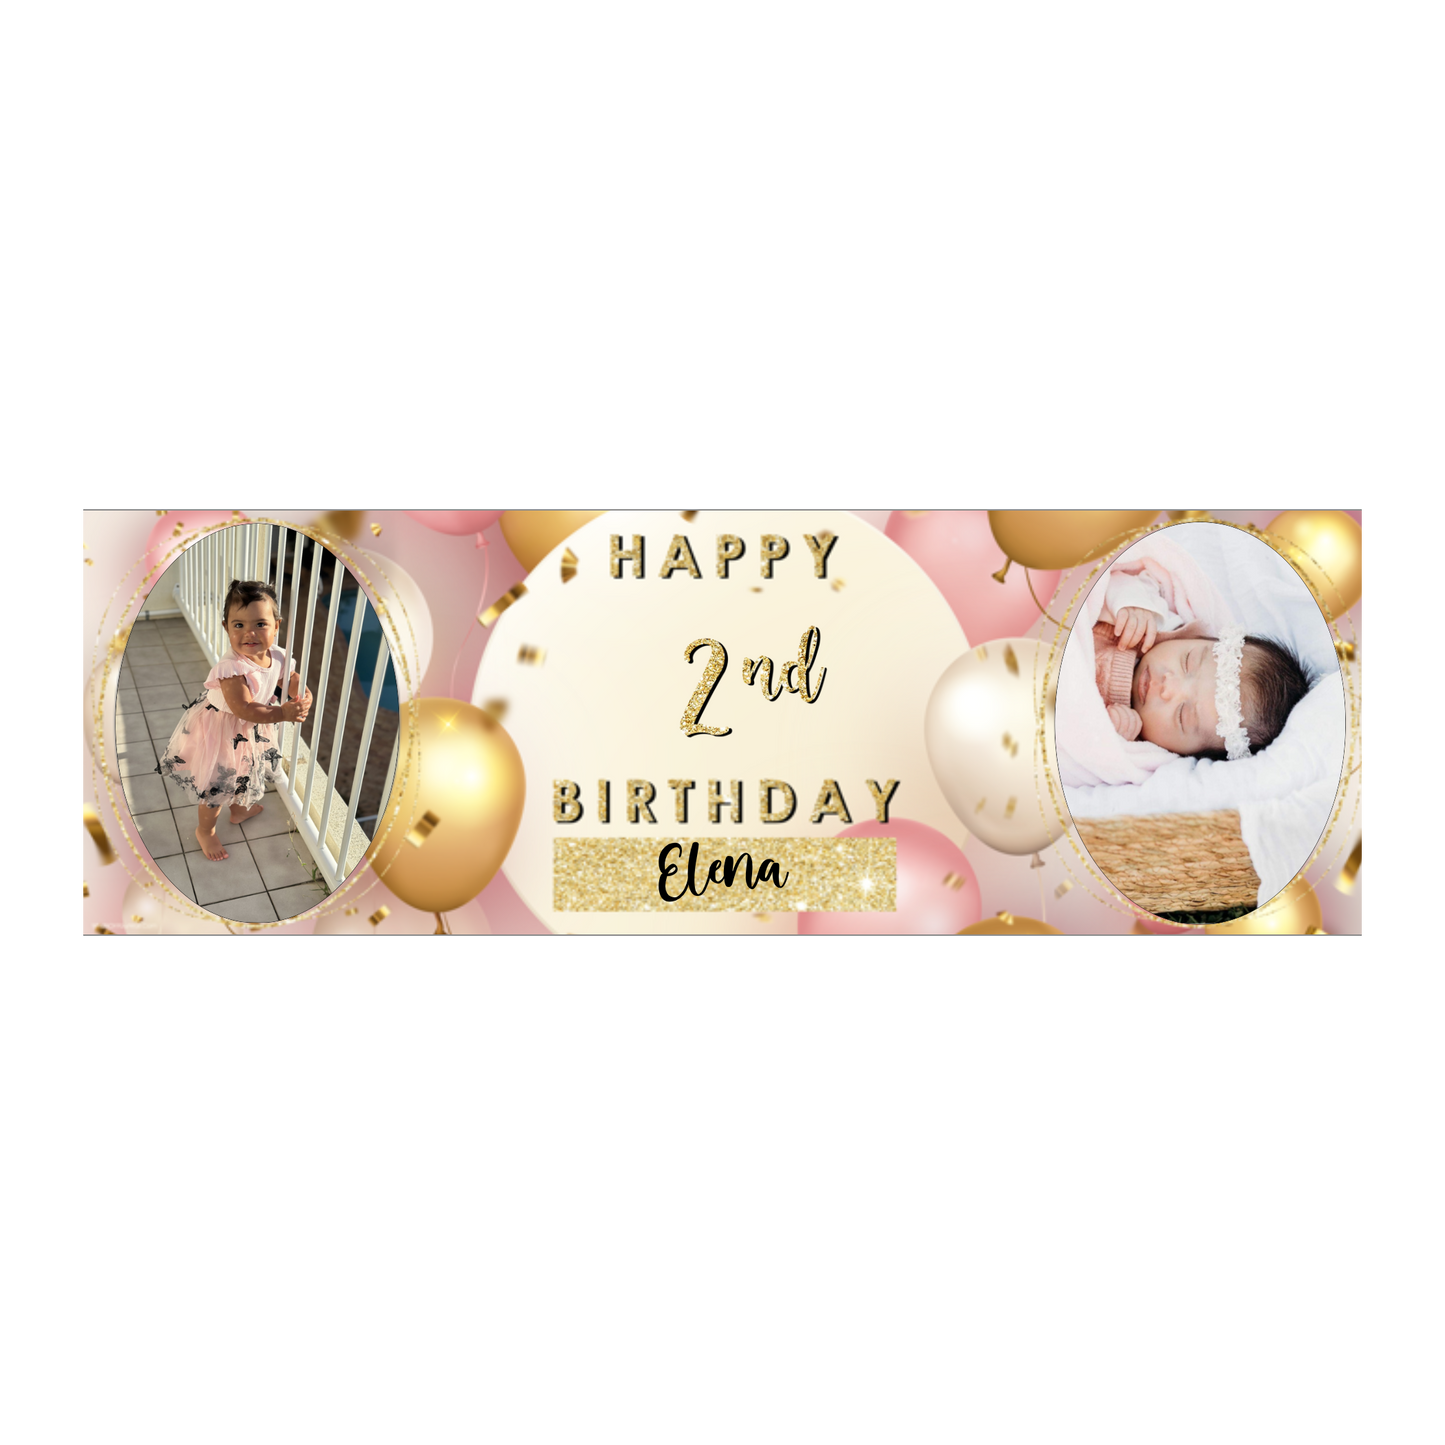 Personalised Birthday Banners Party Decorations in Pink Gold